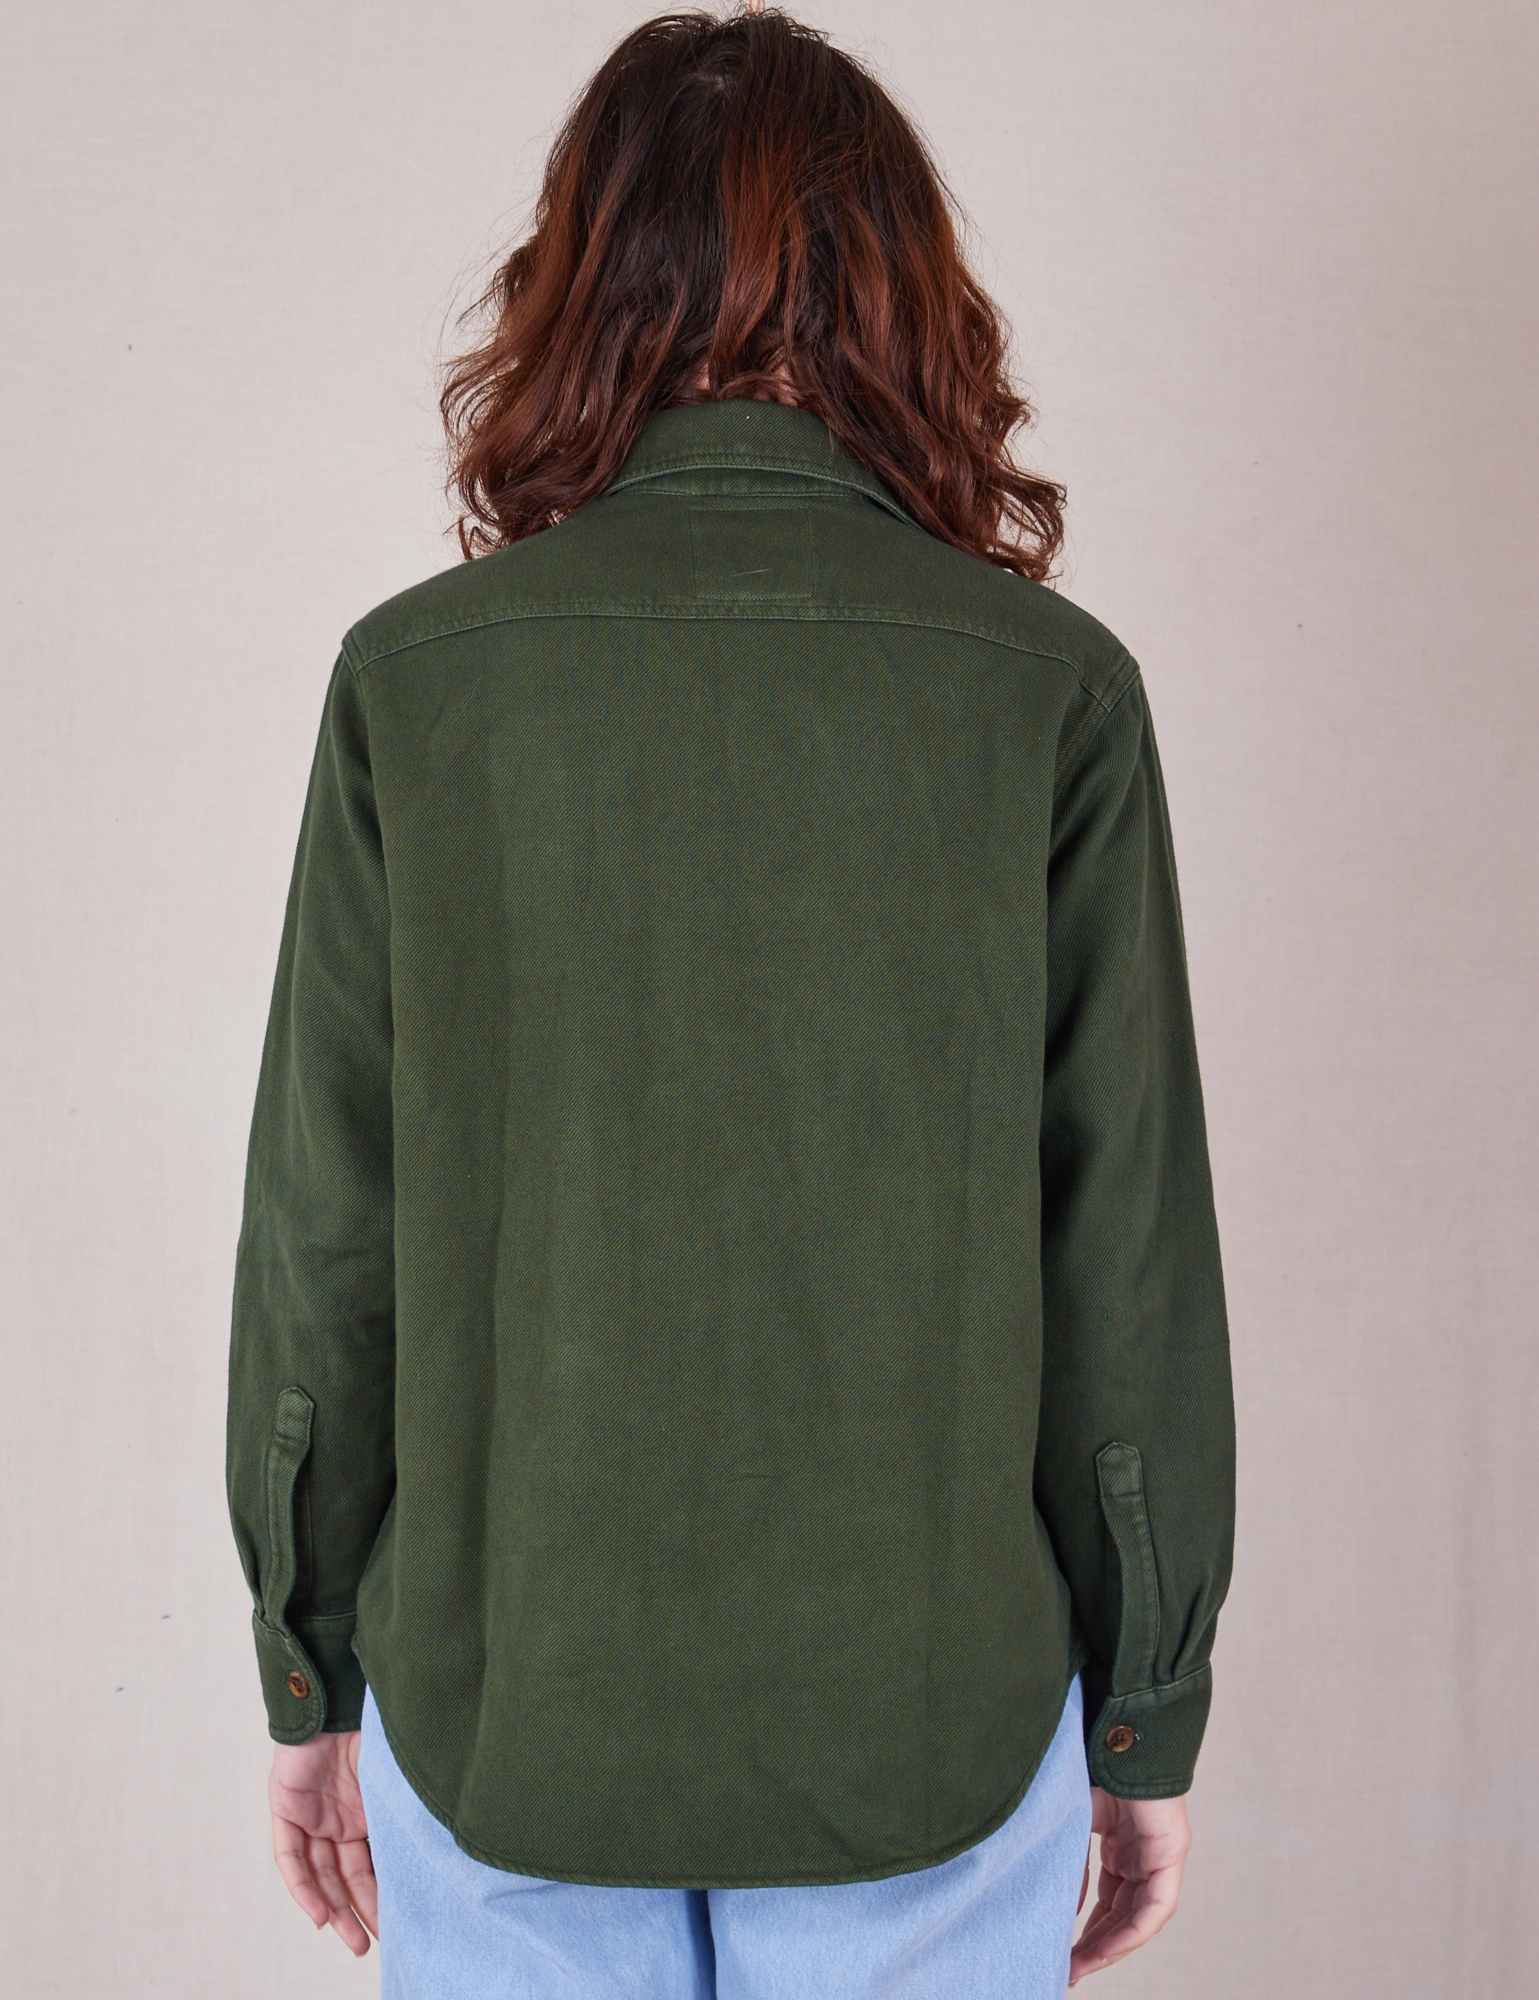 Back view of Flannel Overshirt in Swamp Green on Alex